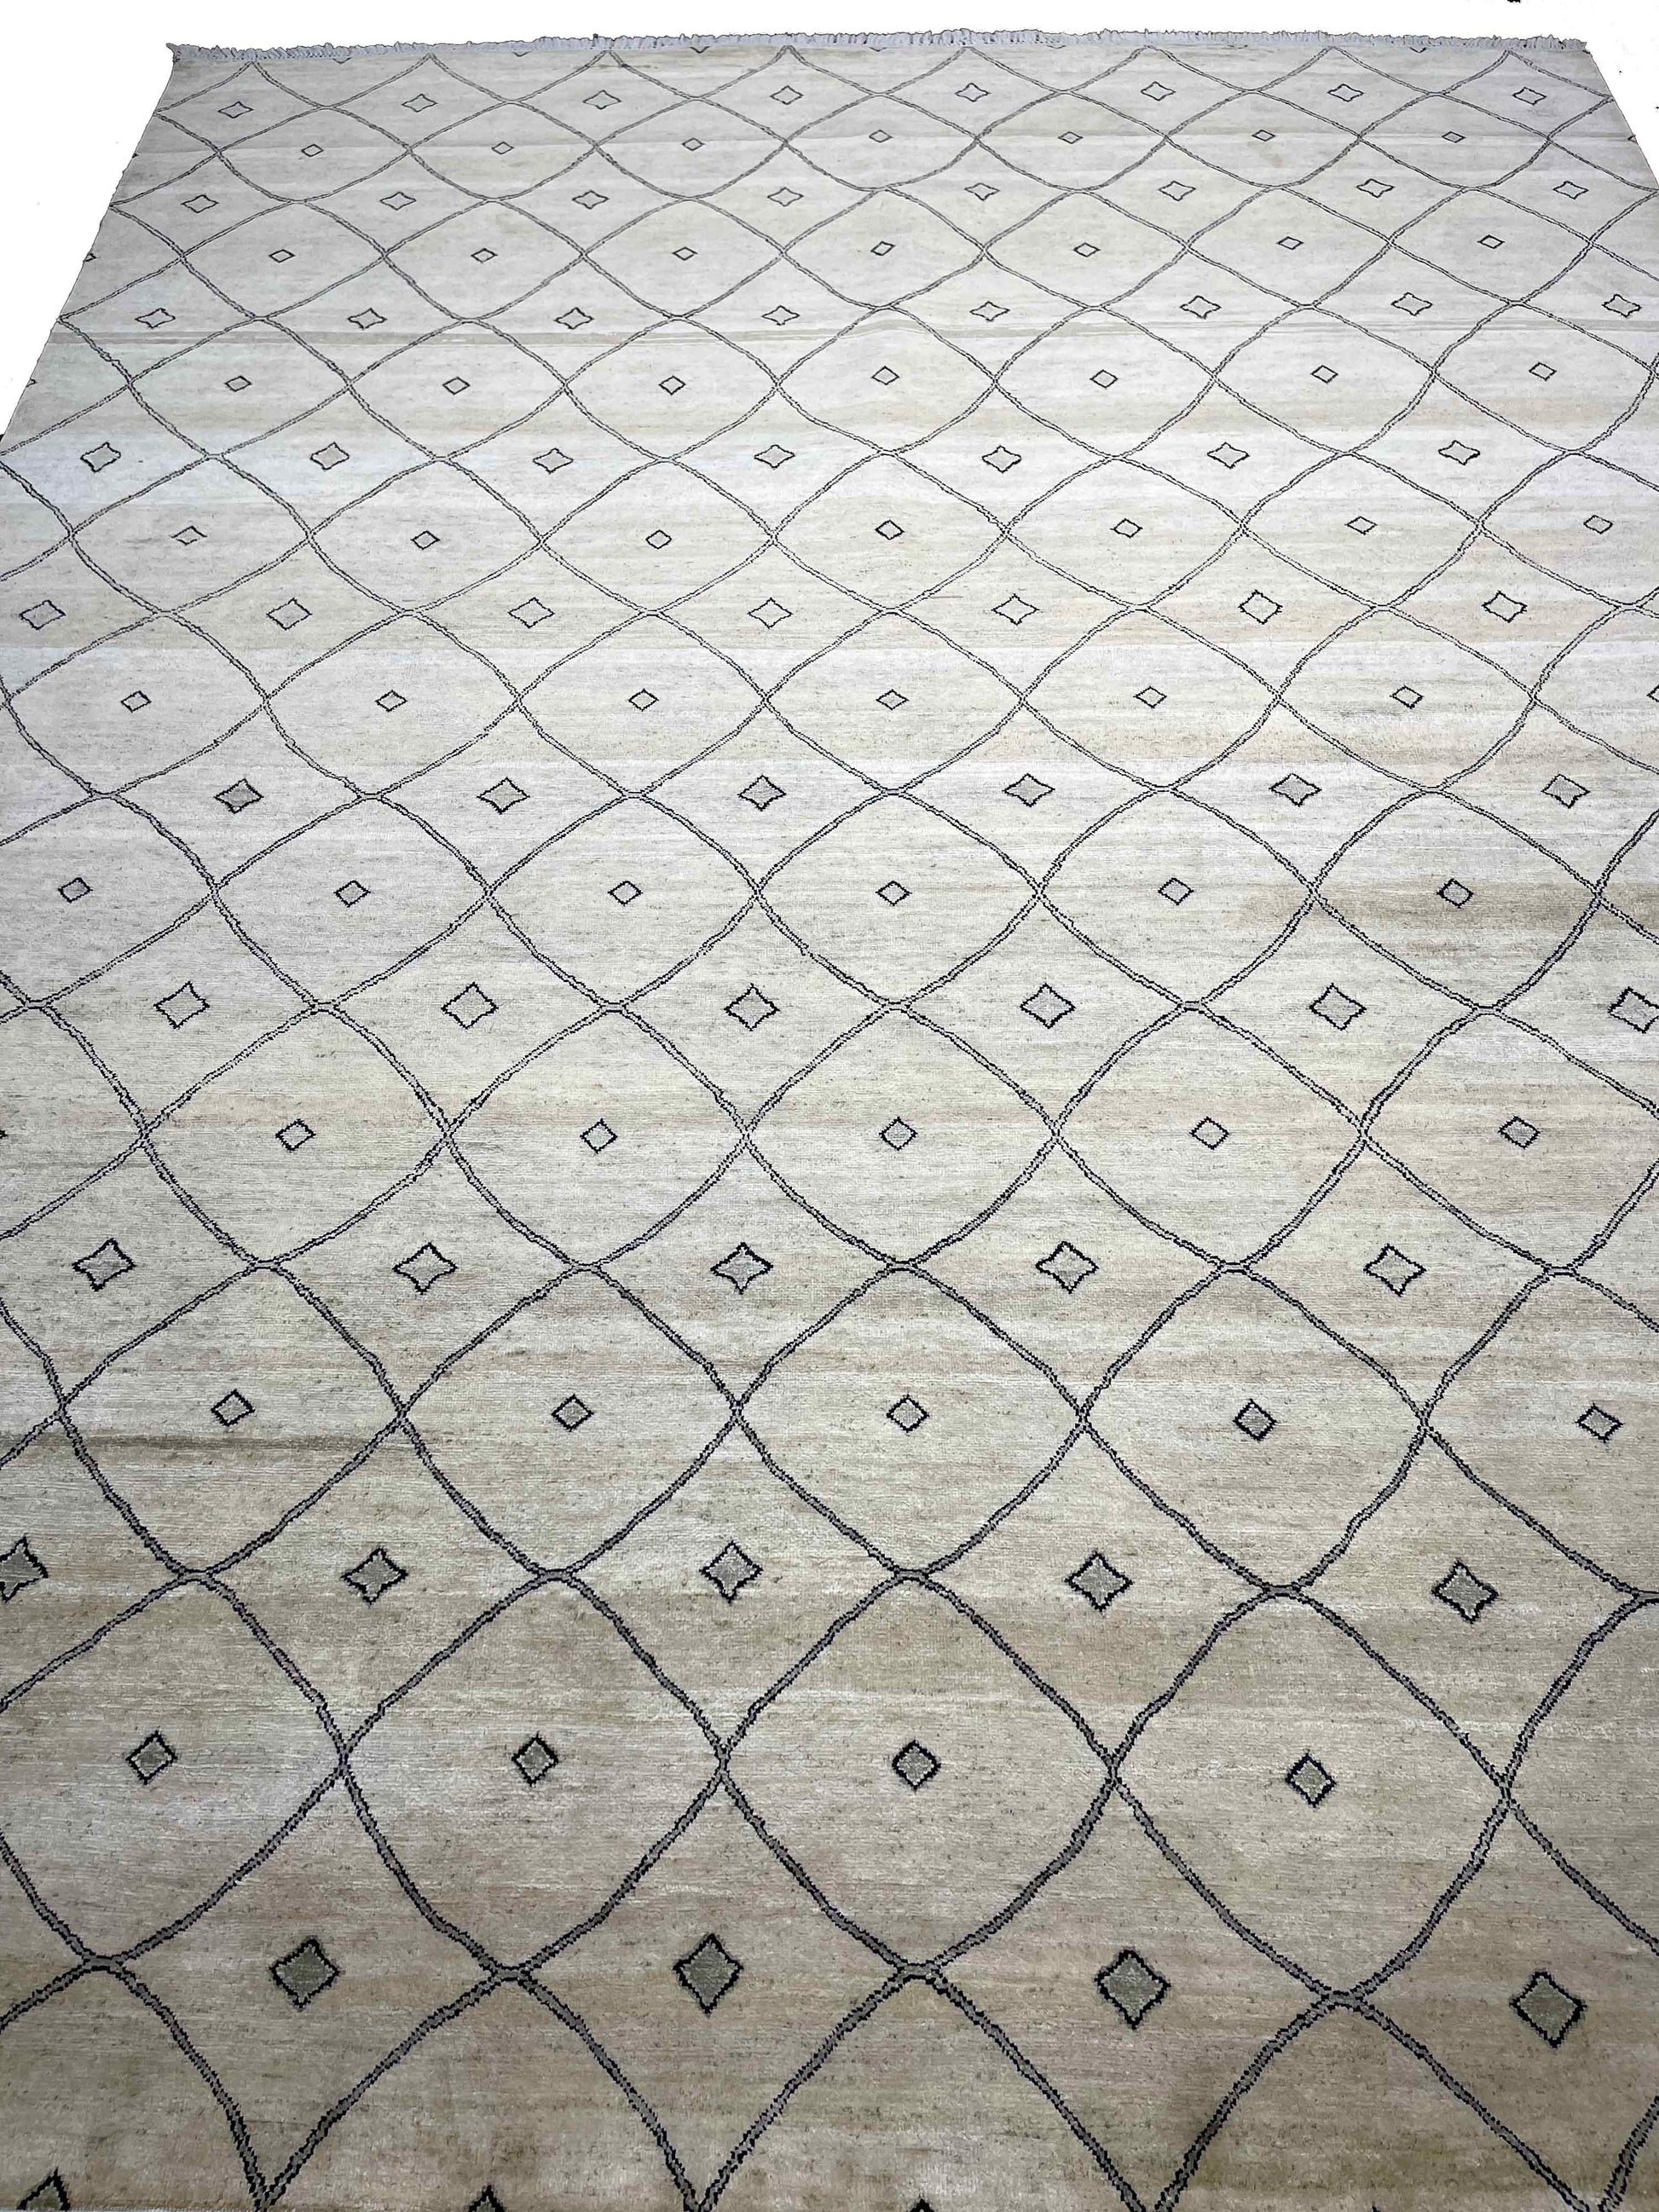 Get trendy with Ivory Pure Silk Modern Handknotted Area Rug 7.11x10.4ft 241x314Cms - Traditional Rugs available at Jaipur Oriental Rugs. Grab yours for $5890.00 today!